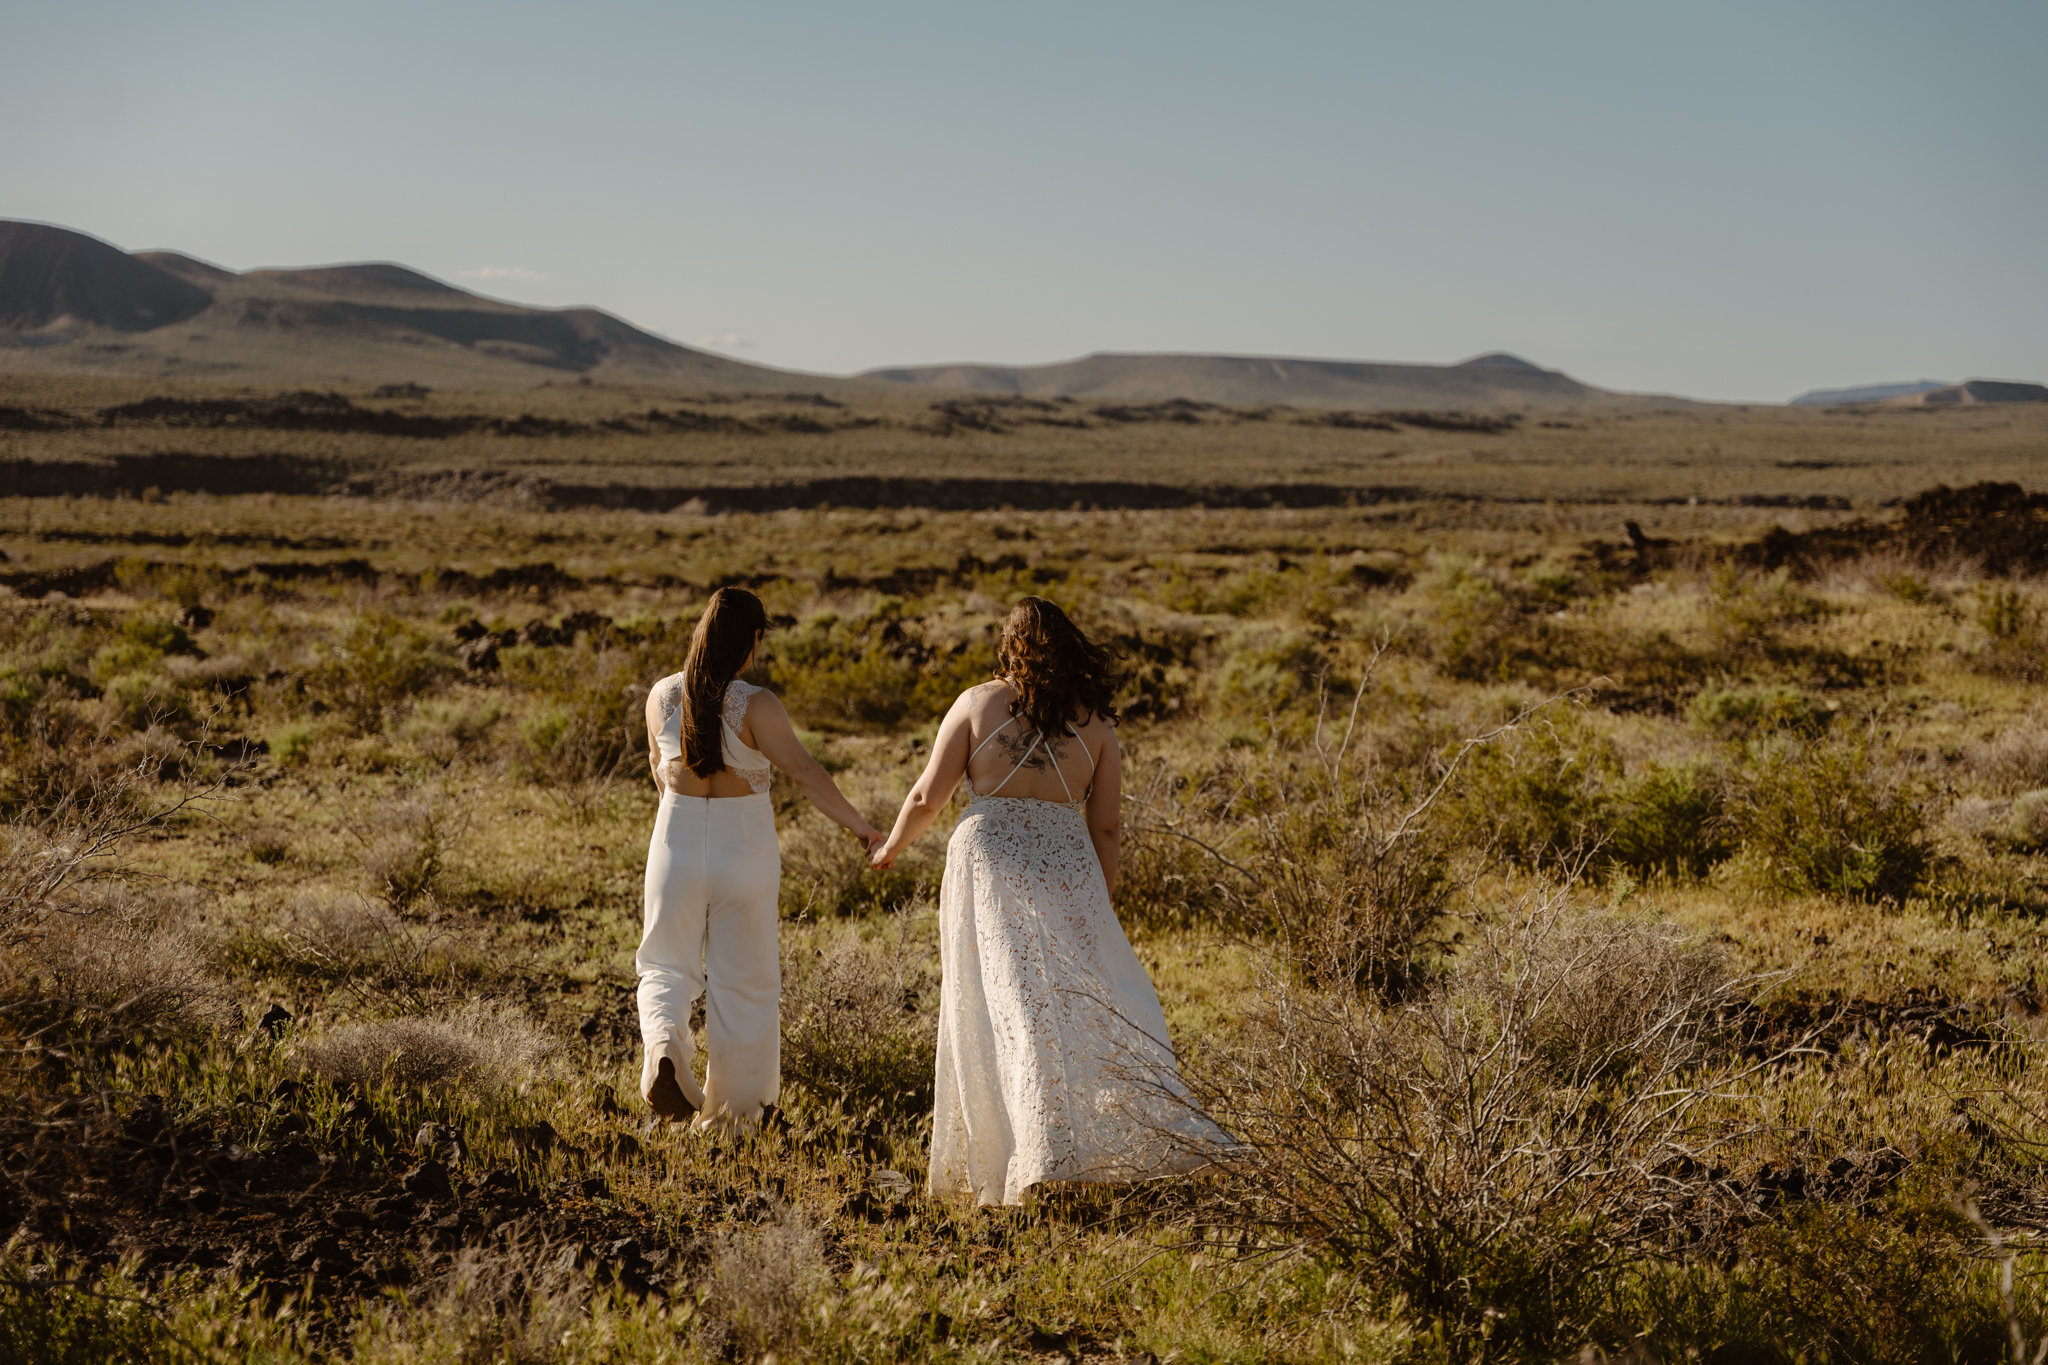 Two people holding hands and walking through a desert landscape, dressed in wedding attire.